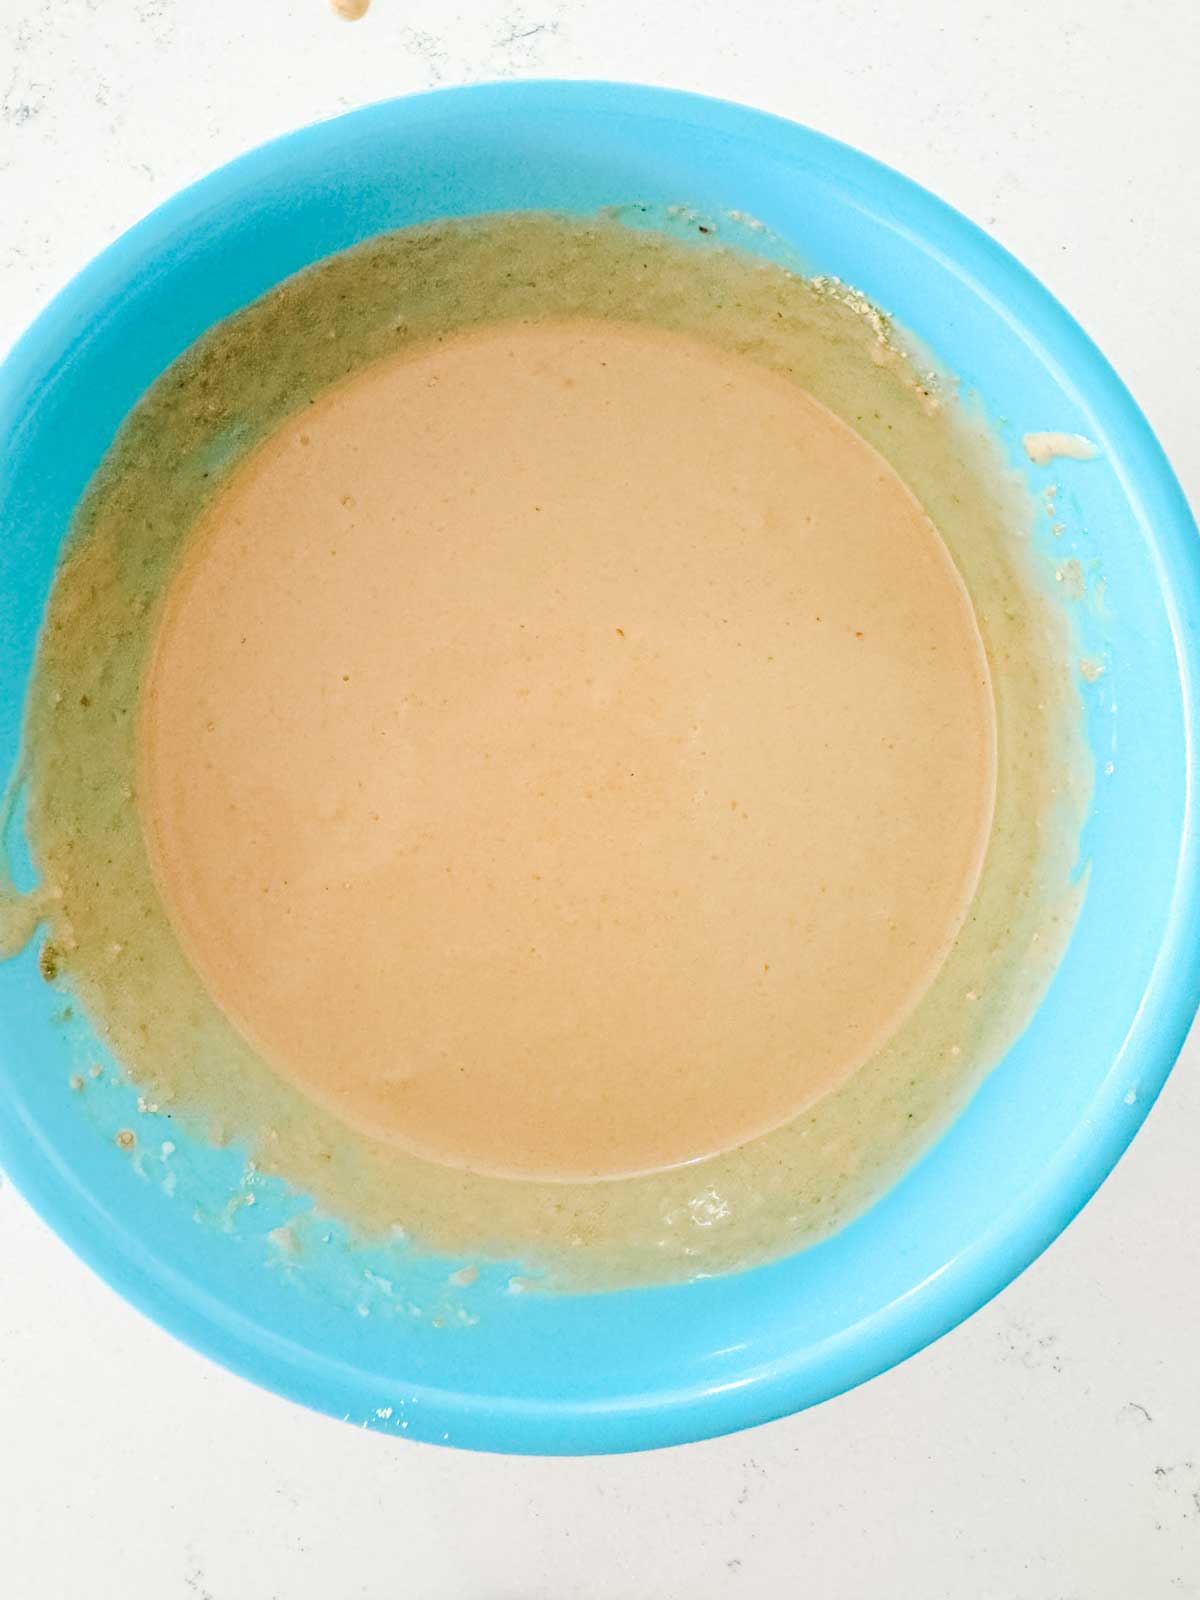 Mayonnaise, heavy cream, soy sauce, sesame oil, dry mustard, brown sugar, and Worcestershire sauce mixed together to make a creamy mustard sauce.